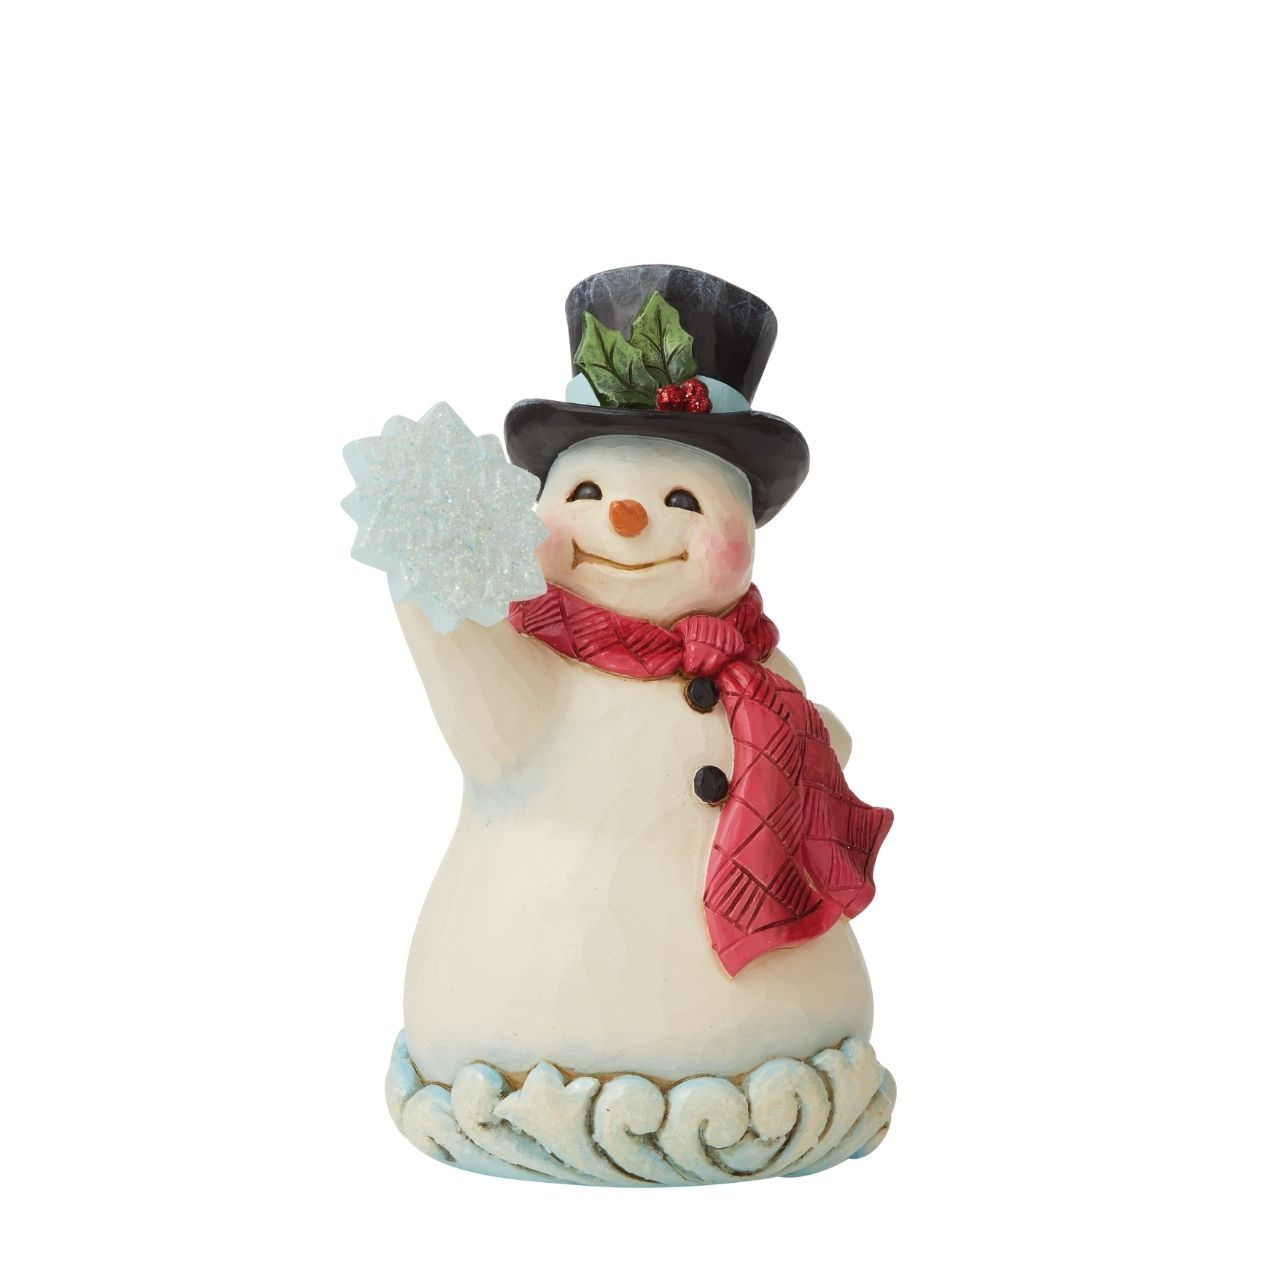 Winter Wonderland Small Snowman Figurine by Jim Shore  "Winter's Simple Joys" This happy Snowman has been designed by Jim Shore as part of his Winter Wonderland collection. Wearing a sweet top hat, he is holding an acrylic snowflake to add to the feeling of snow and ice before added embellishments of glitter are added.